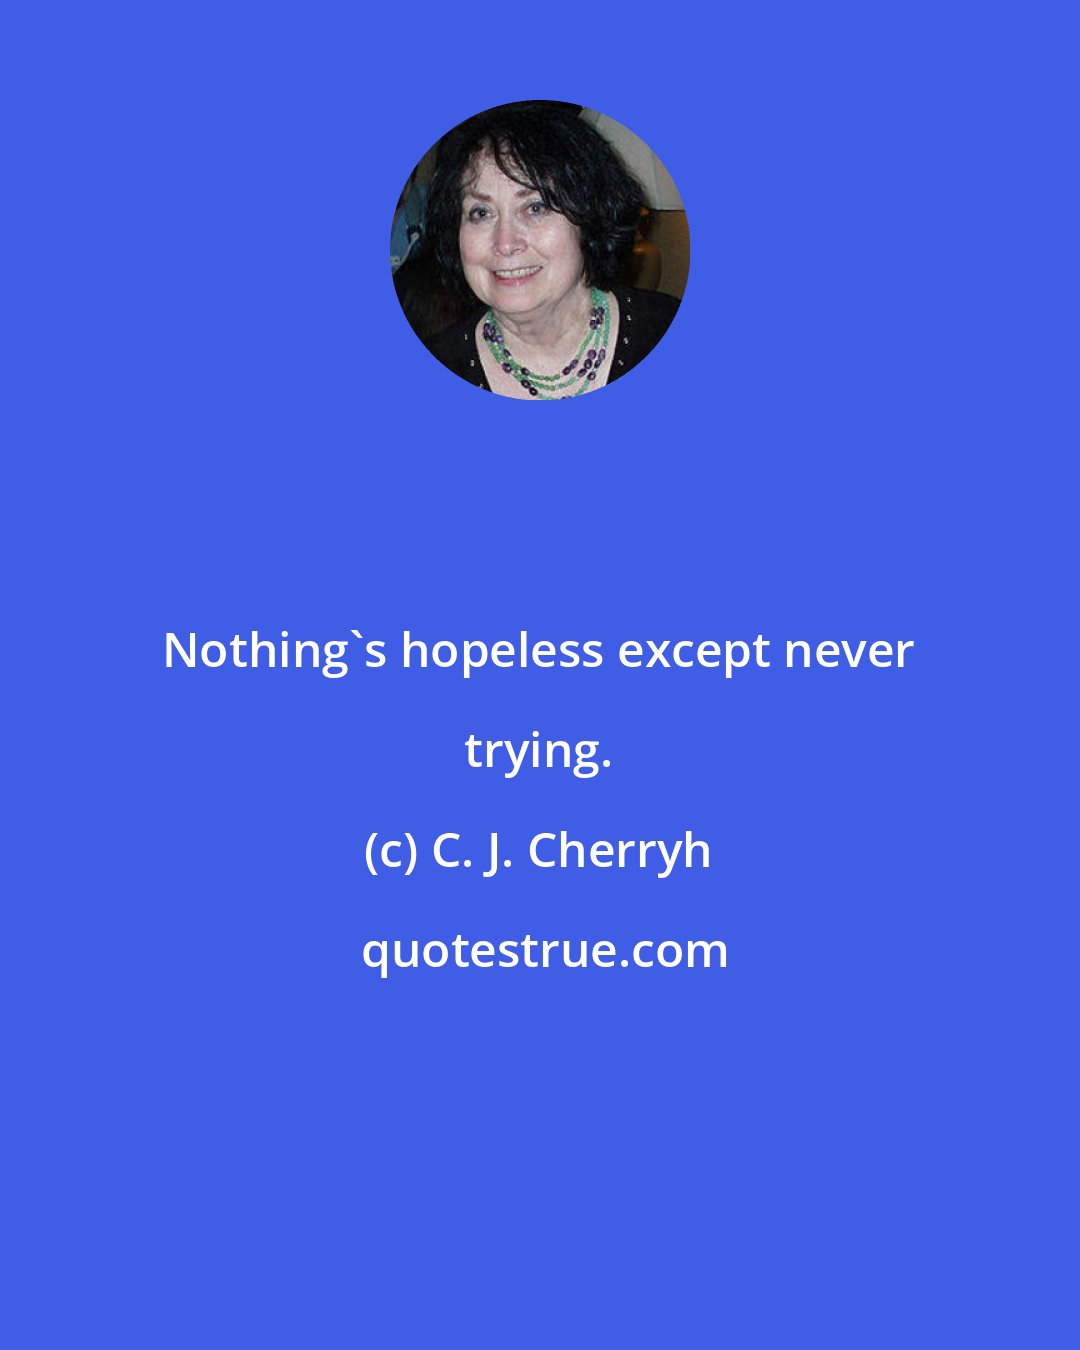 C. J. Cherryh: Nothing's hopeless except never trying.